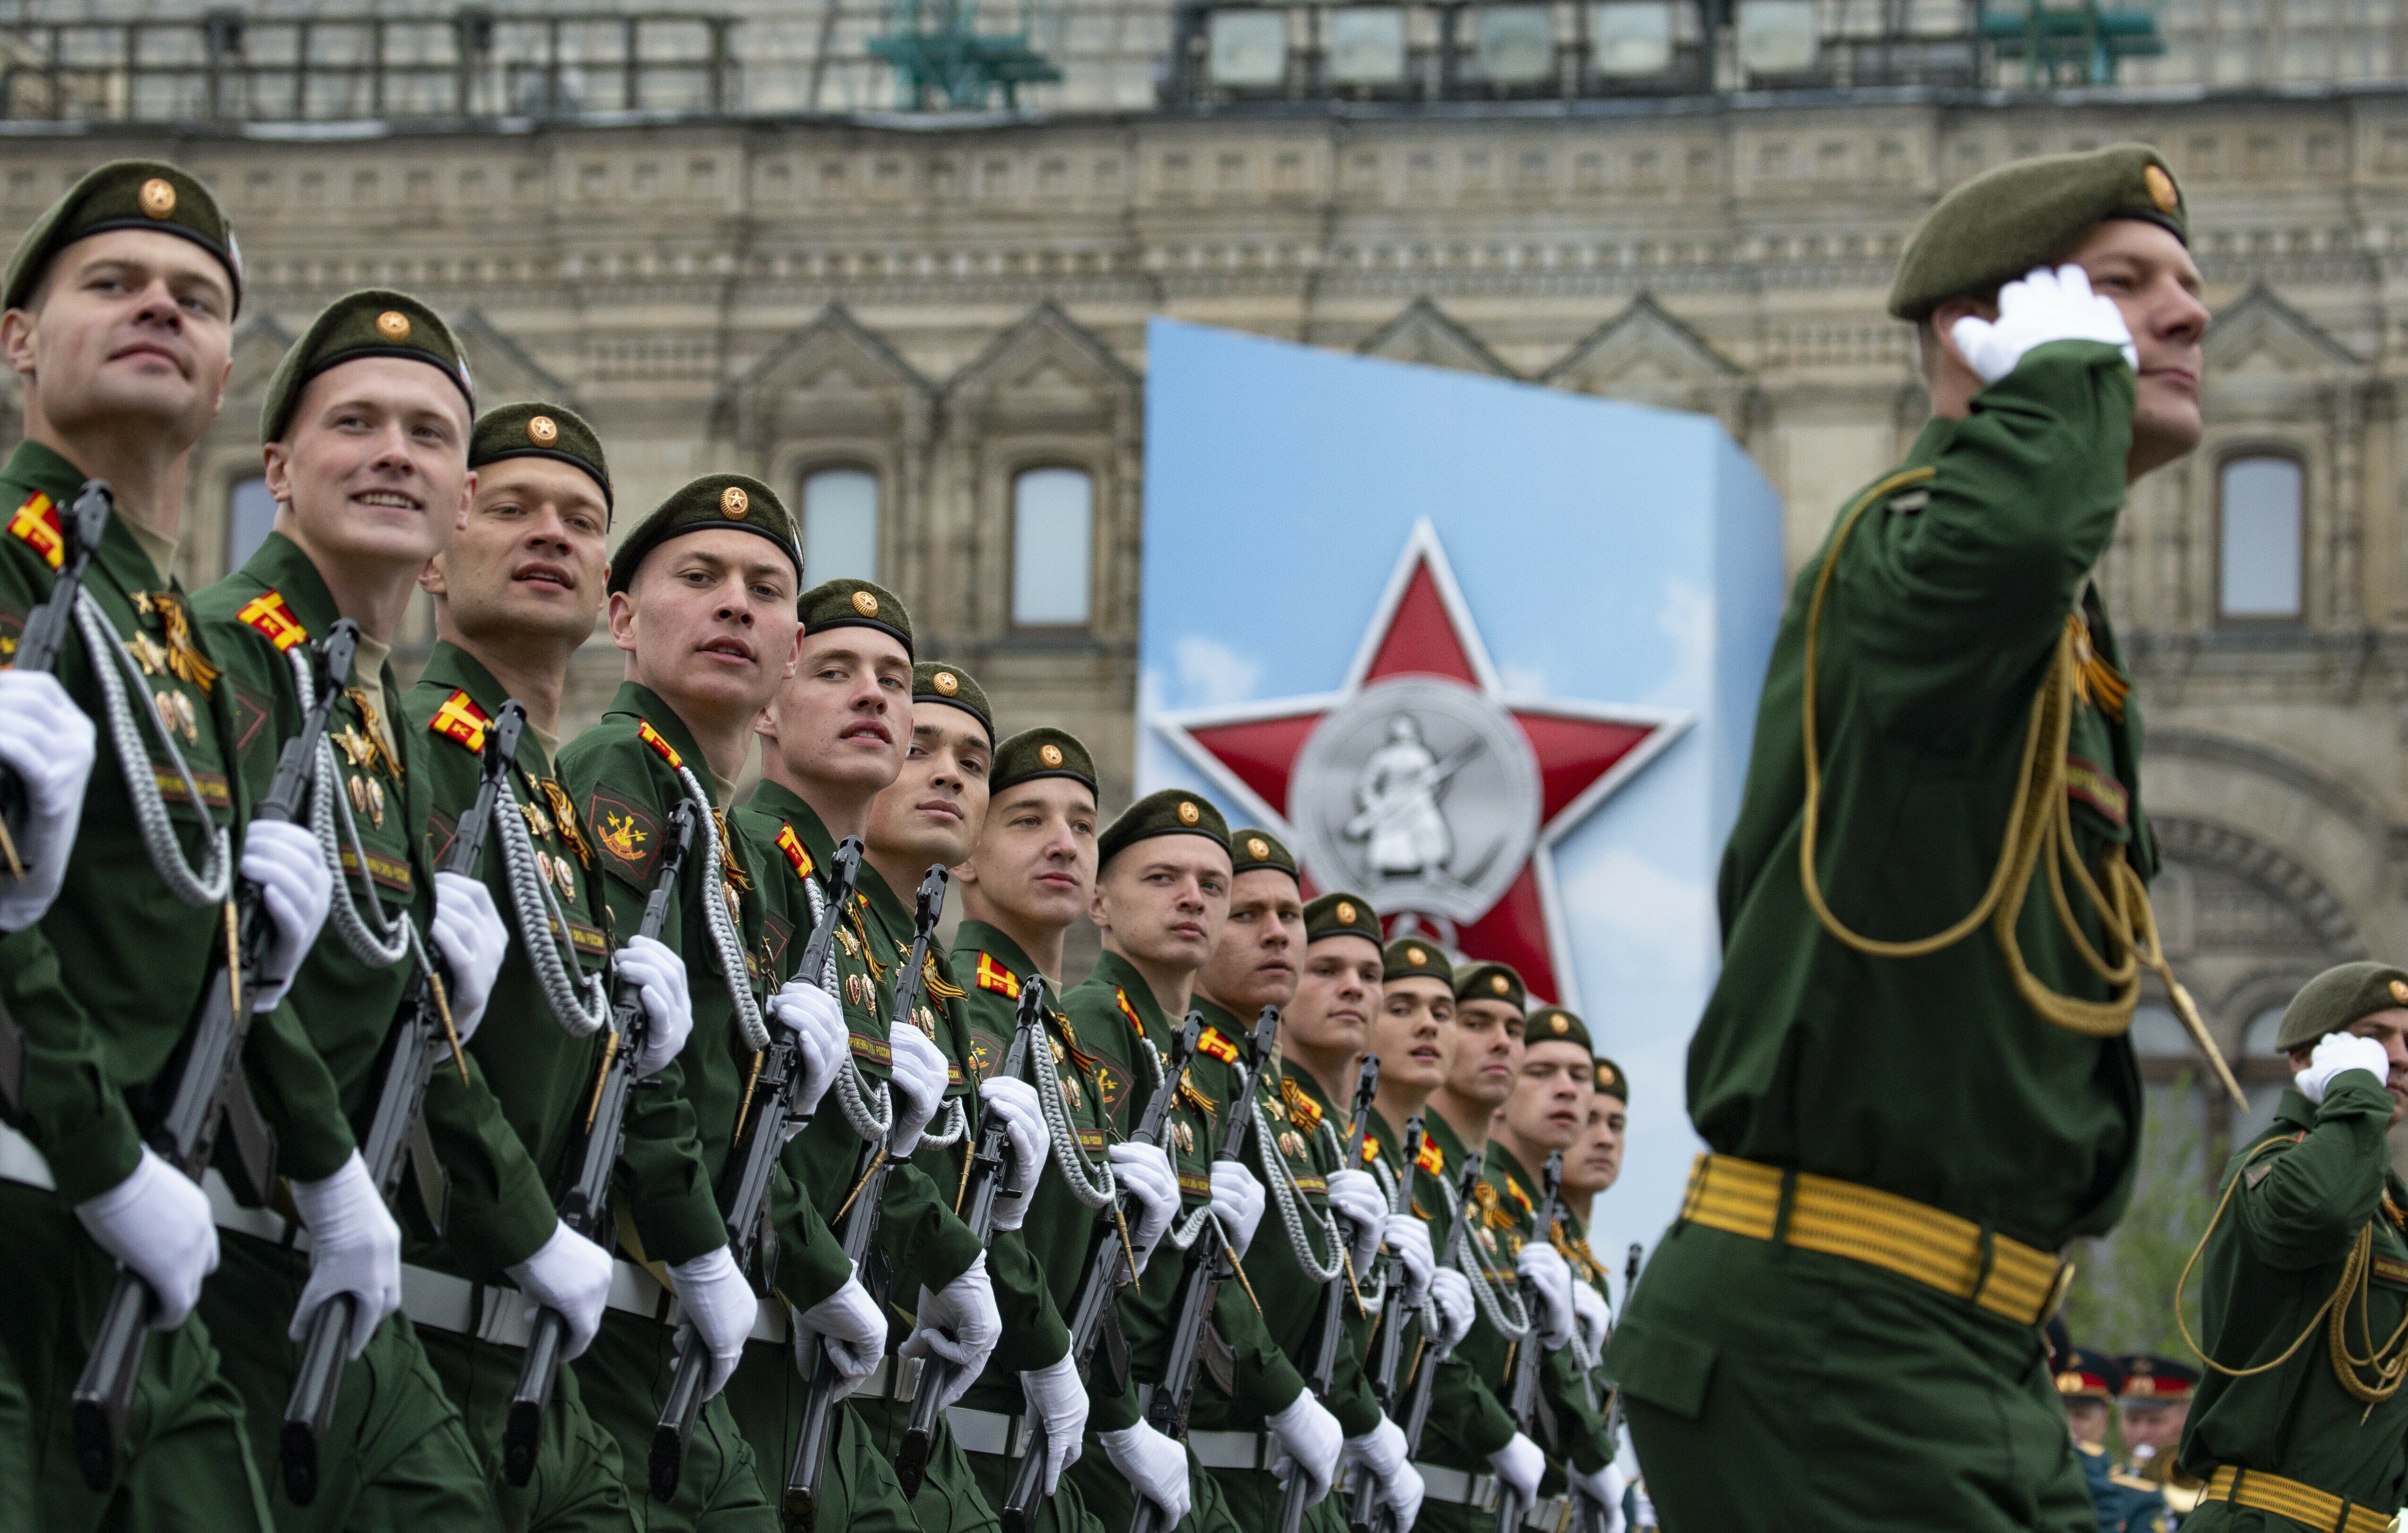 Russian troops march during the Victory Day military parade to celebrate 74 years since the victory in WWII in Red Square in Moscow, Russia, Thursday, May 9, 2019. Putin has told the annual military Victory Day parade in Red Square that the country will continue to strengthen its armed forces.(AP Photo/Alexander Zemlianichenko)